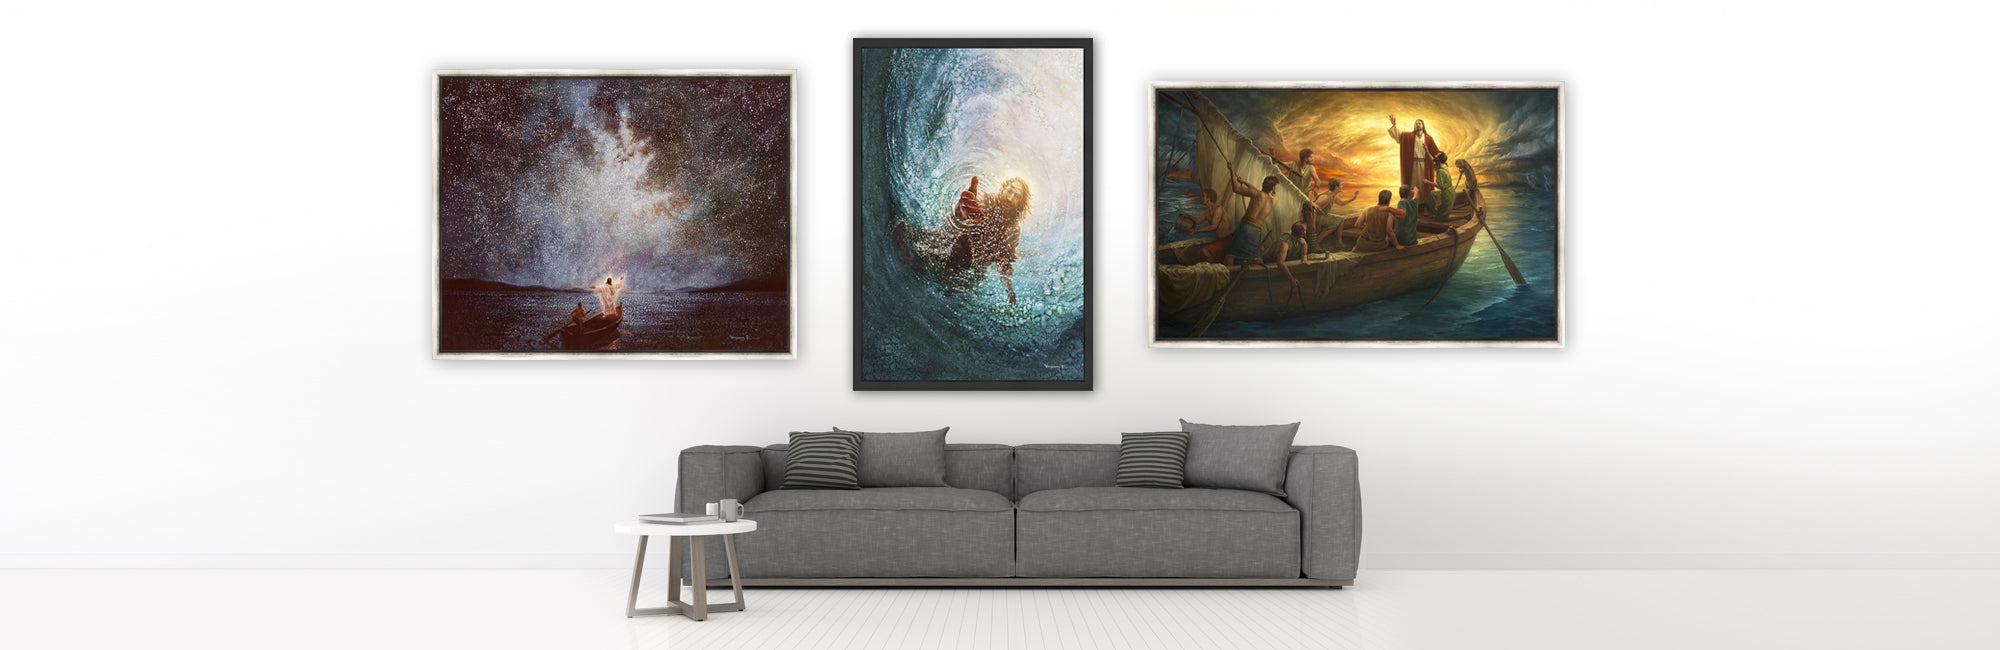 Large and Museum Art, Request A Quote Today